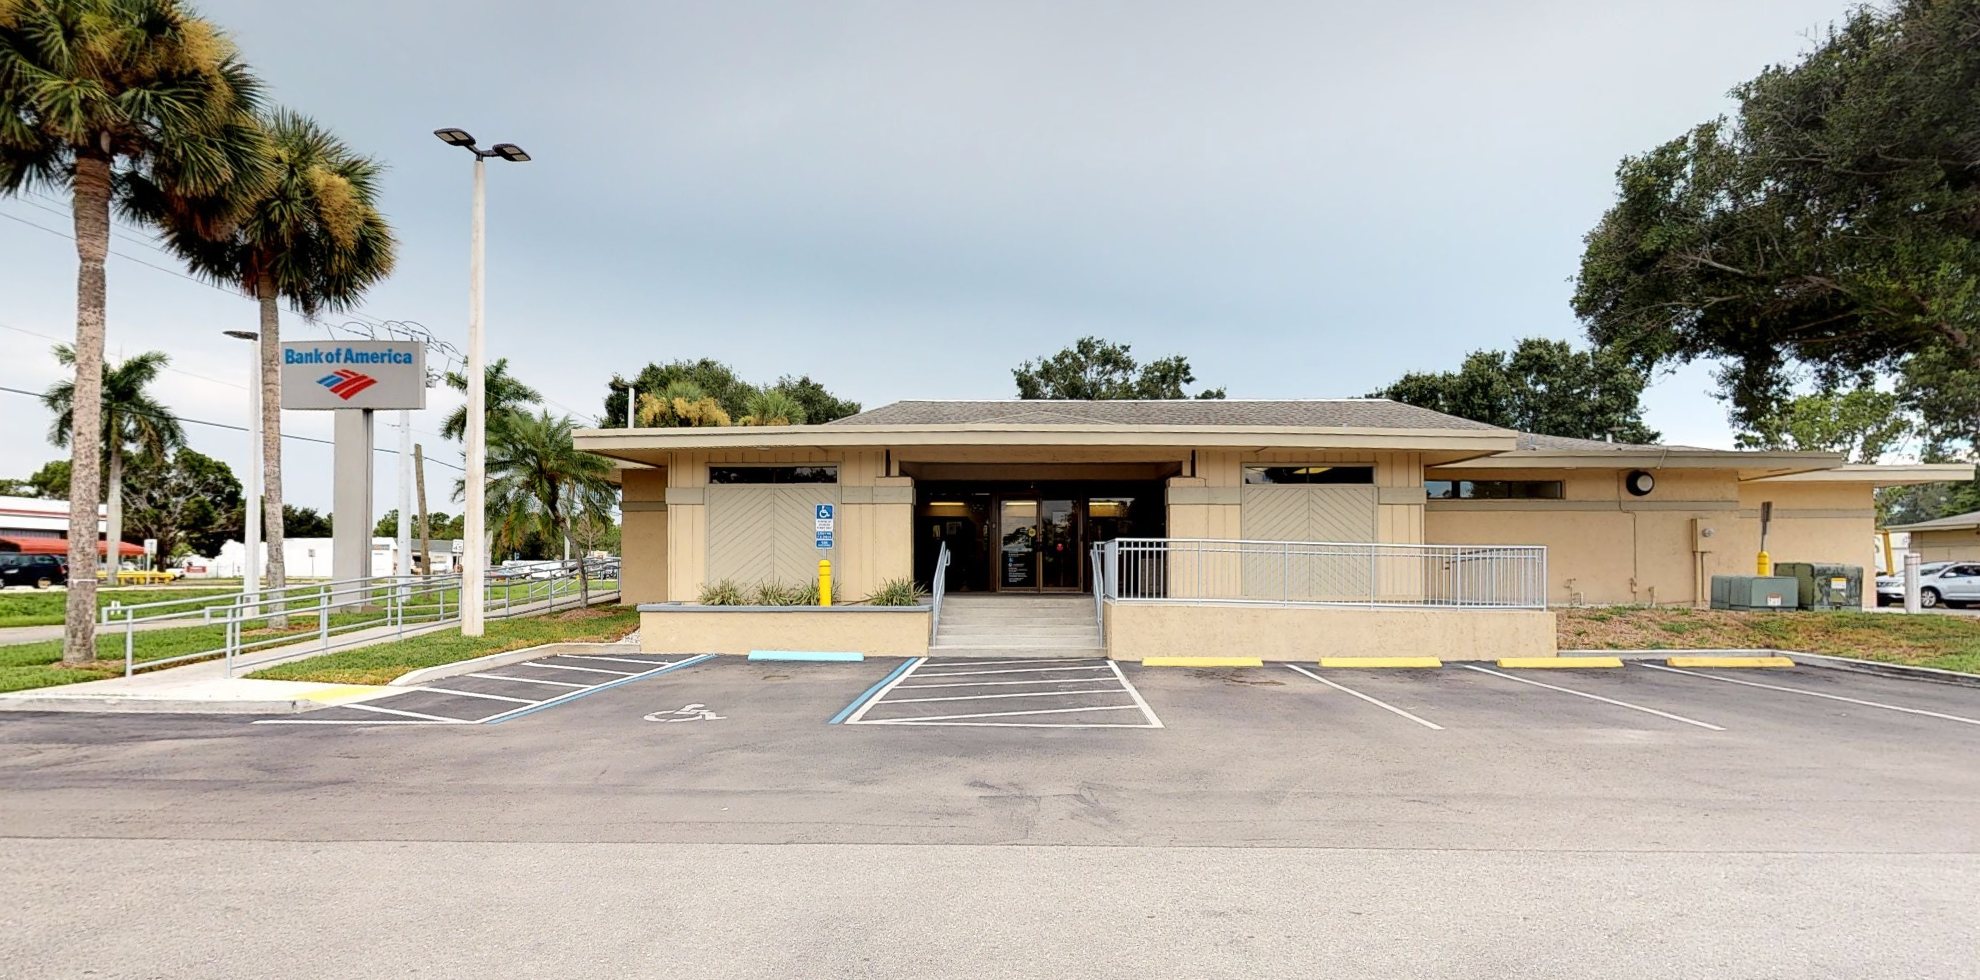 Bank of America financial center with drive-thru ATM | 16020 San Carlos Blvd, Fort Myers, FL 33908